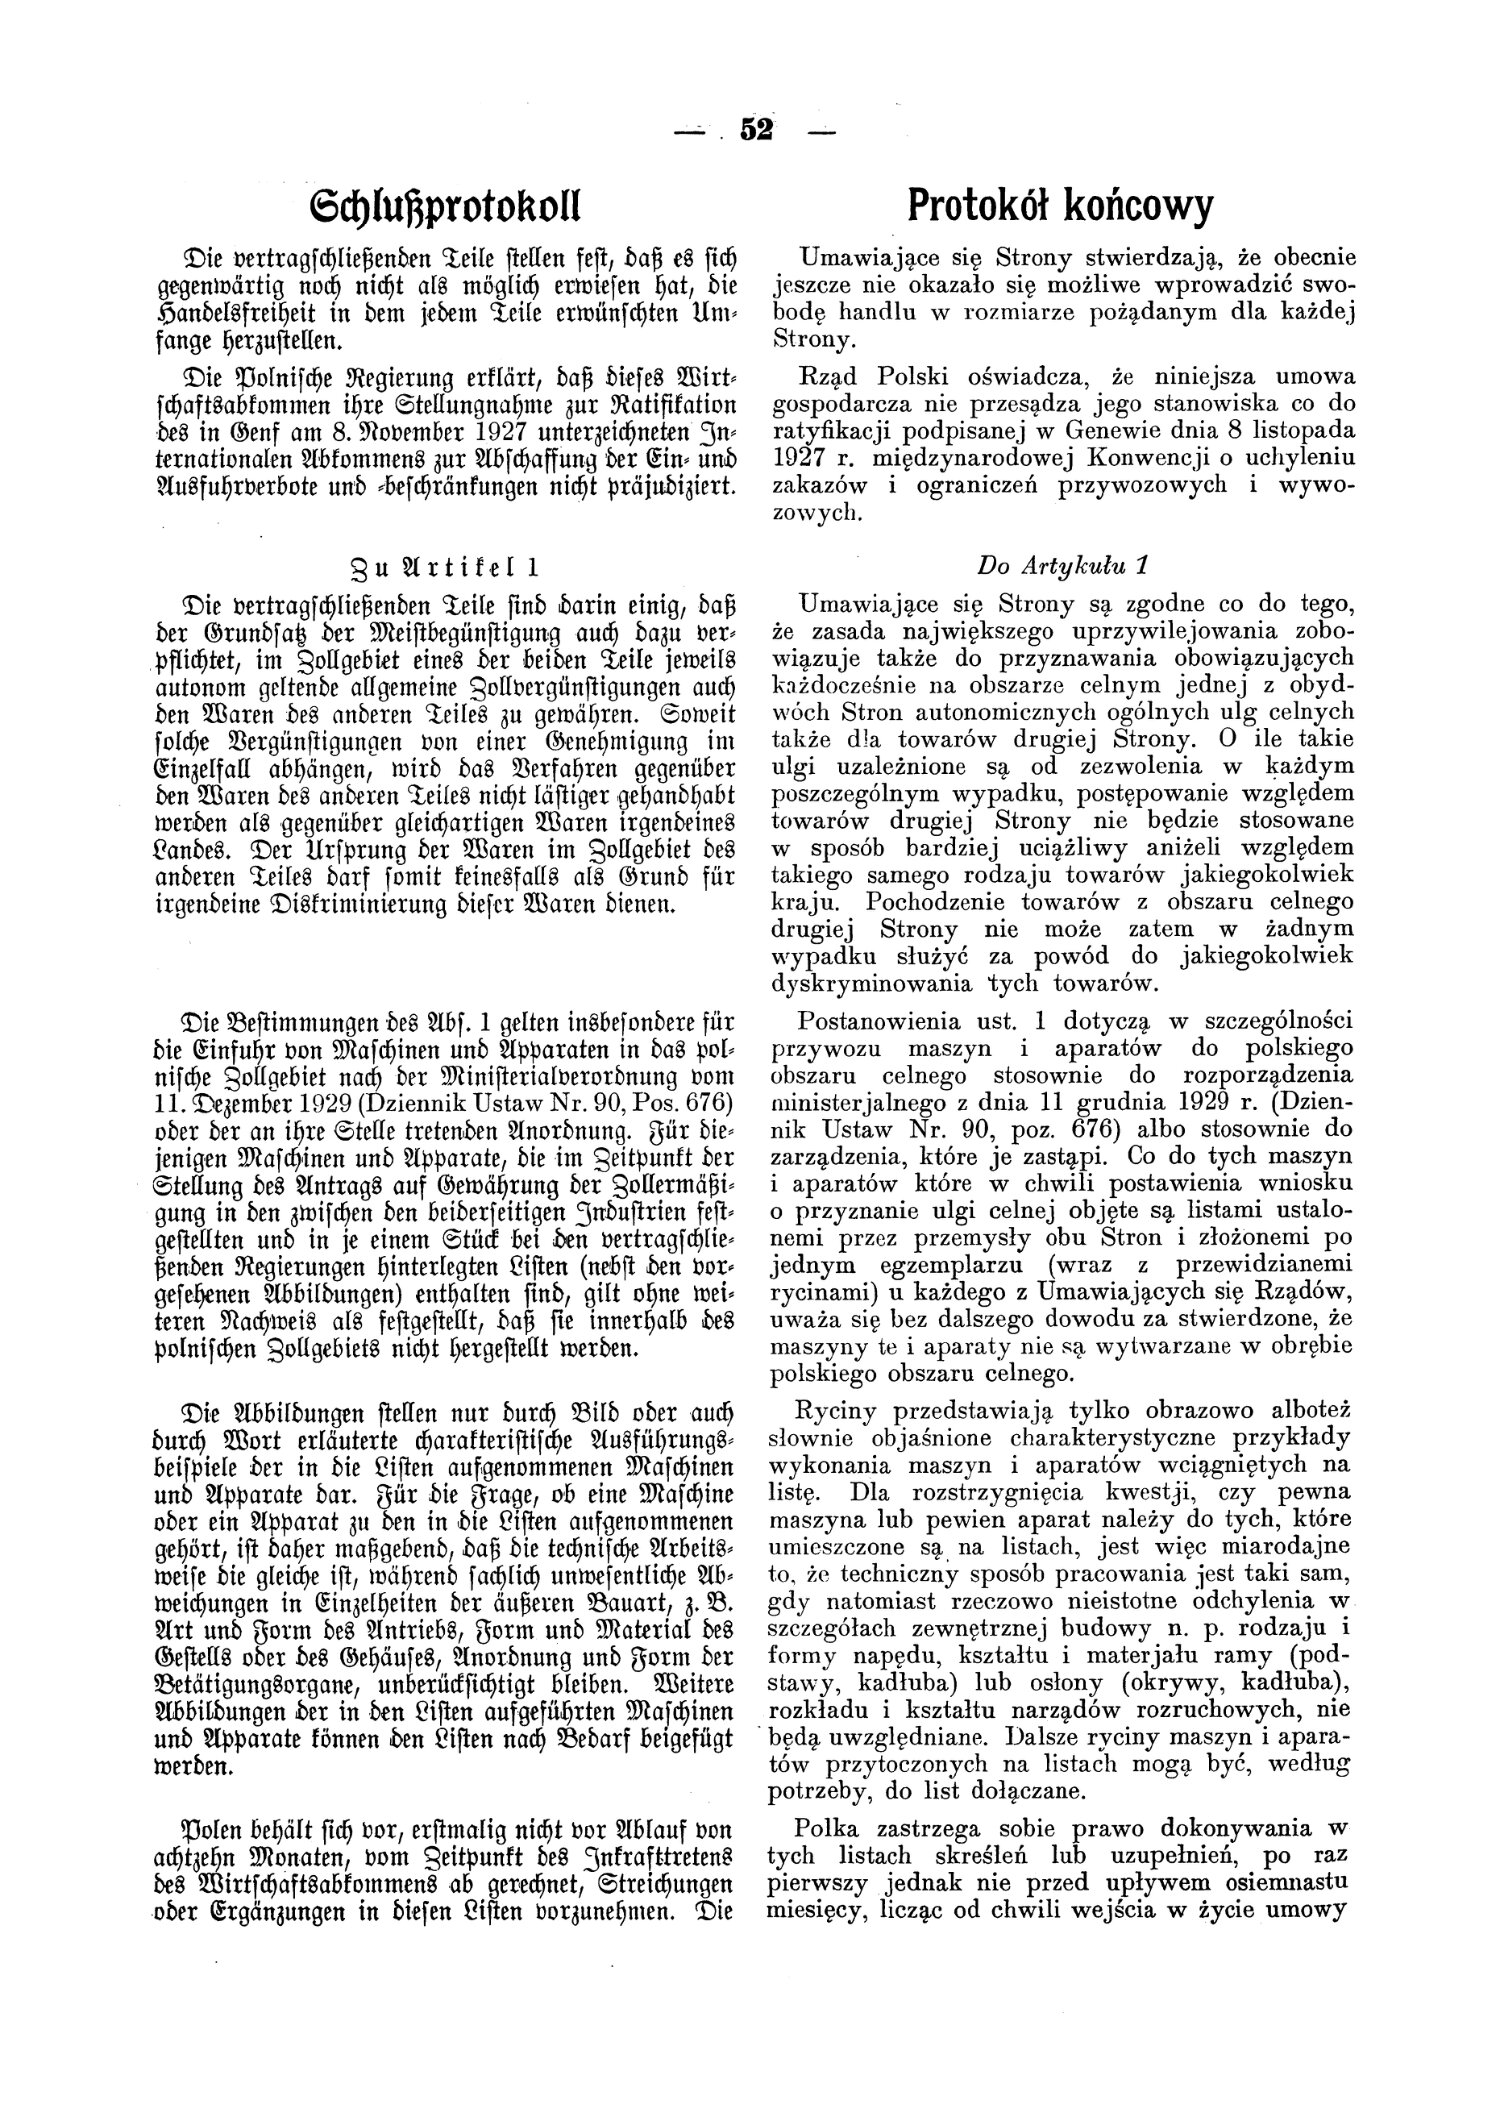 Scan of page 52